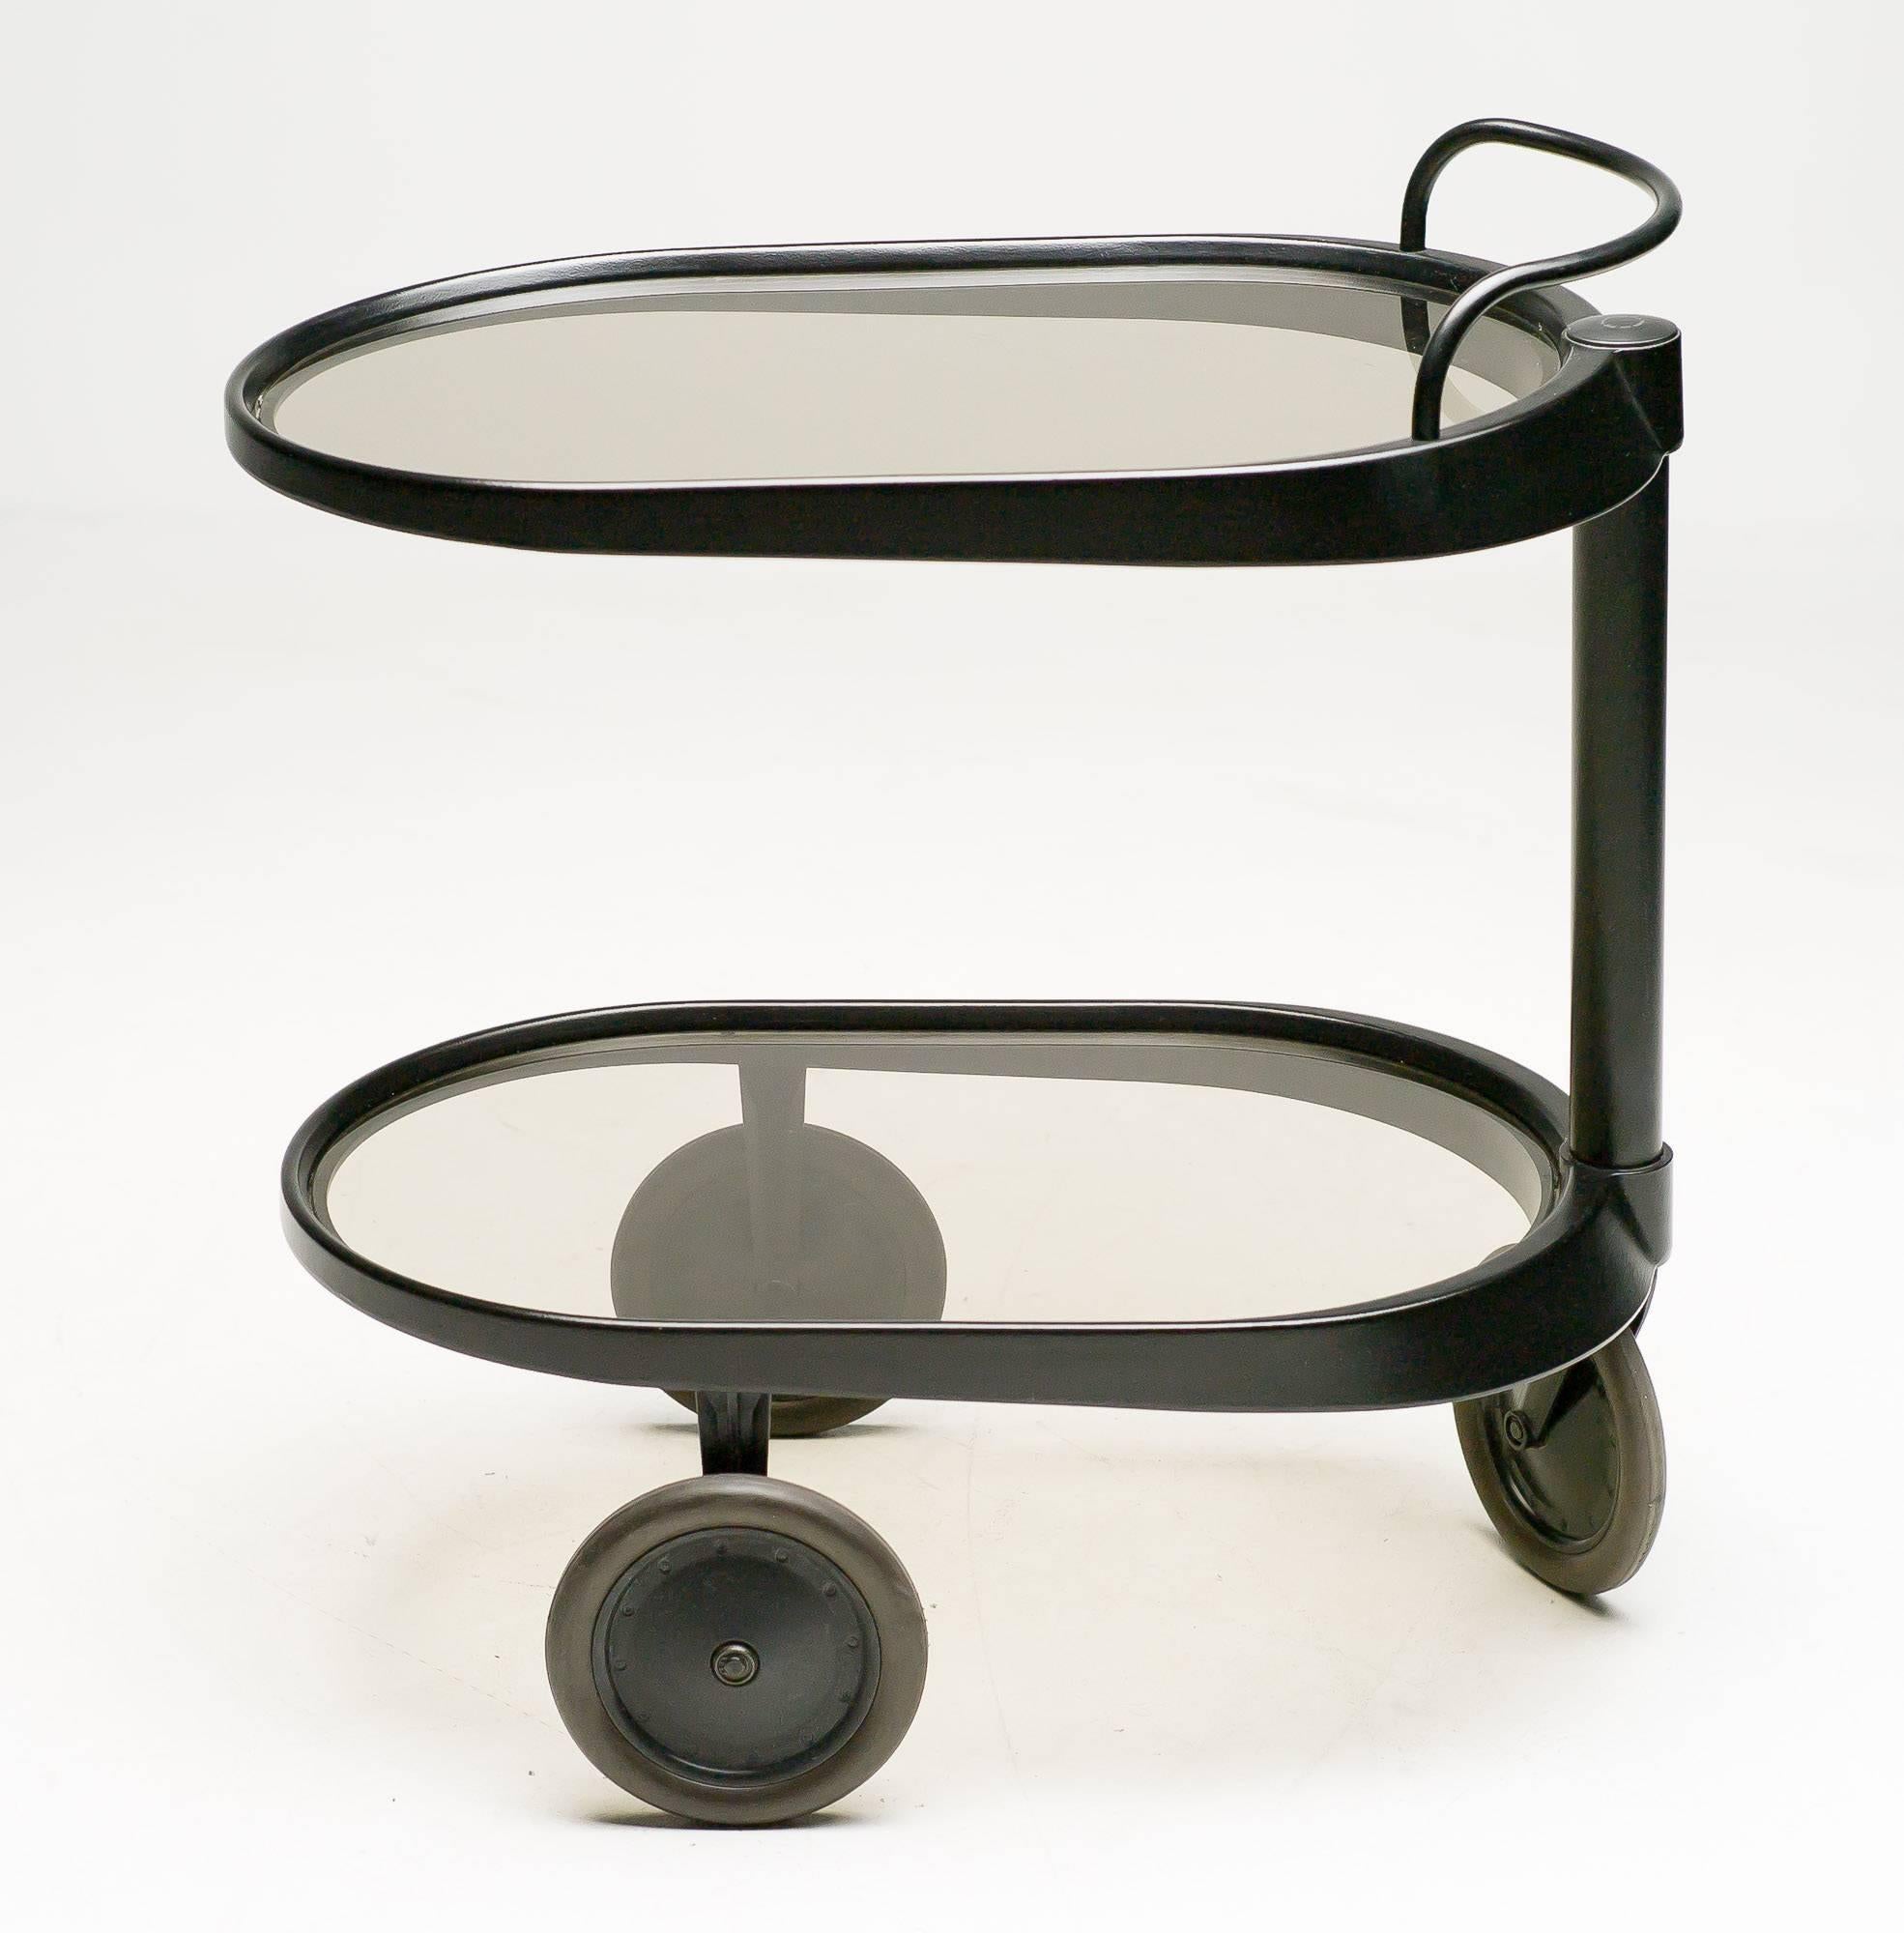 Emsta trolley, bar card.
Designed by Enzo Mari for Alessi in 1989.

Handlebar above a cylindrical shaft side support, on three wheels, stamped Alessi.

In black with smoke glass, very elegant.

We offer museum quality crating and affordable